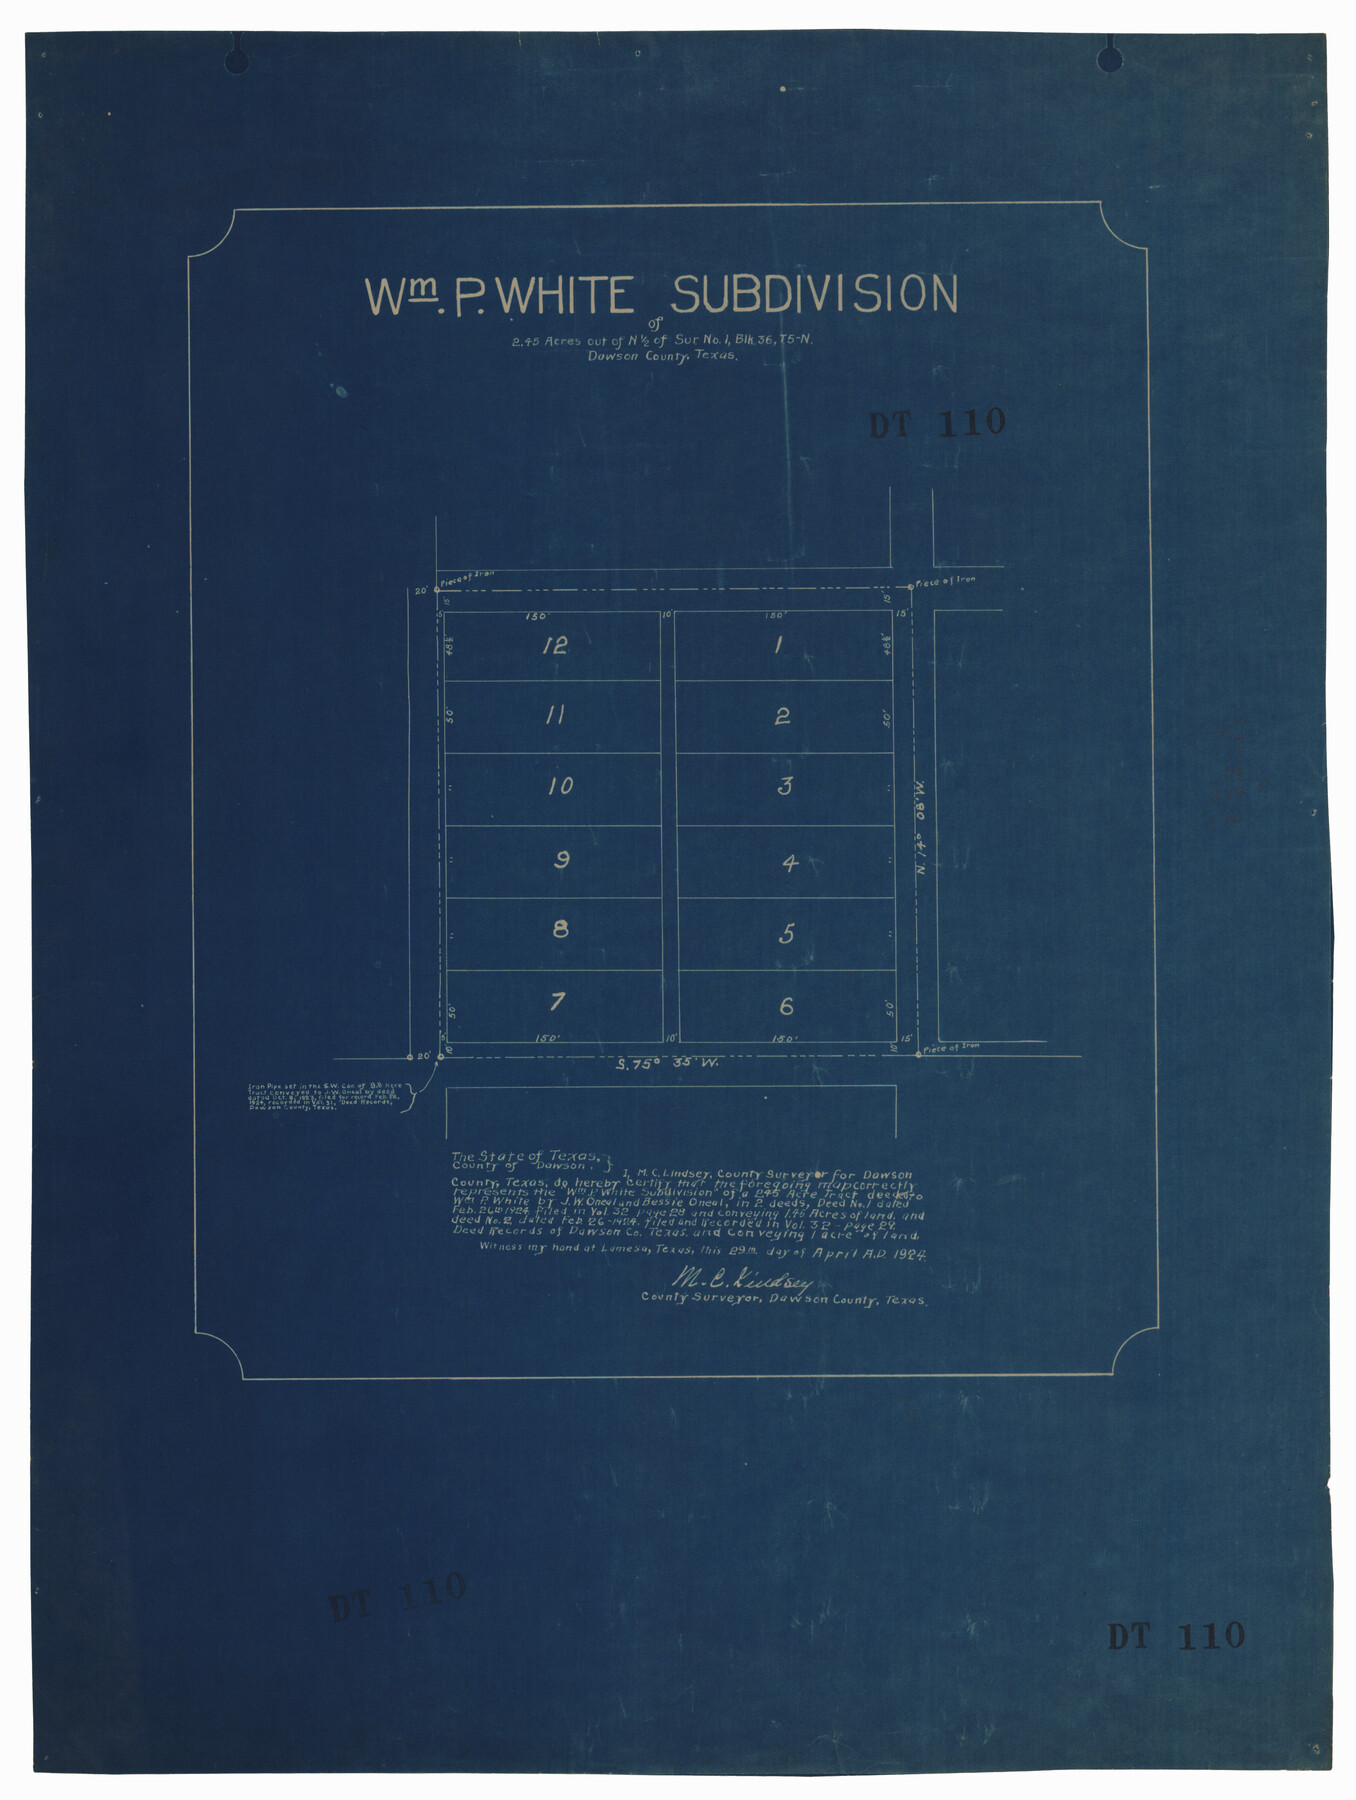 92575, William P. White Subdivision of 2.45 Acres out of North Half of Survey 1, Block 36, Township 5 North, Dawson County, Texas, Twichell Survey Records